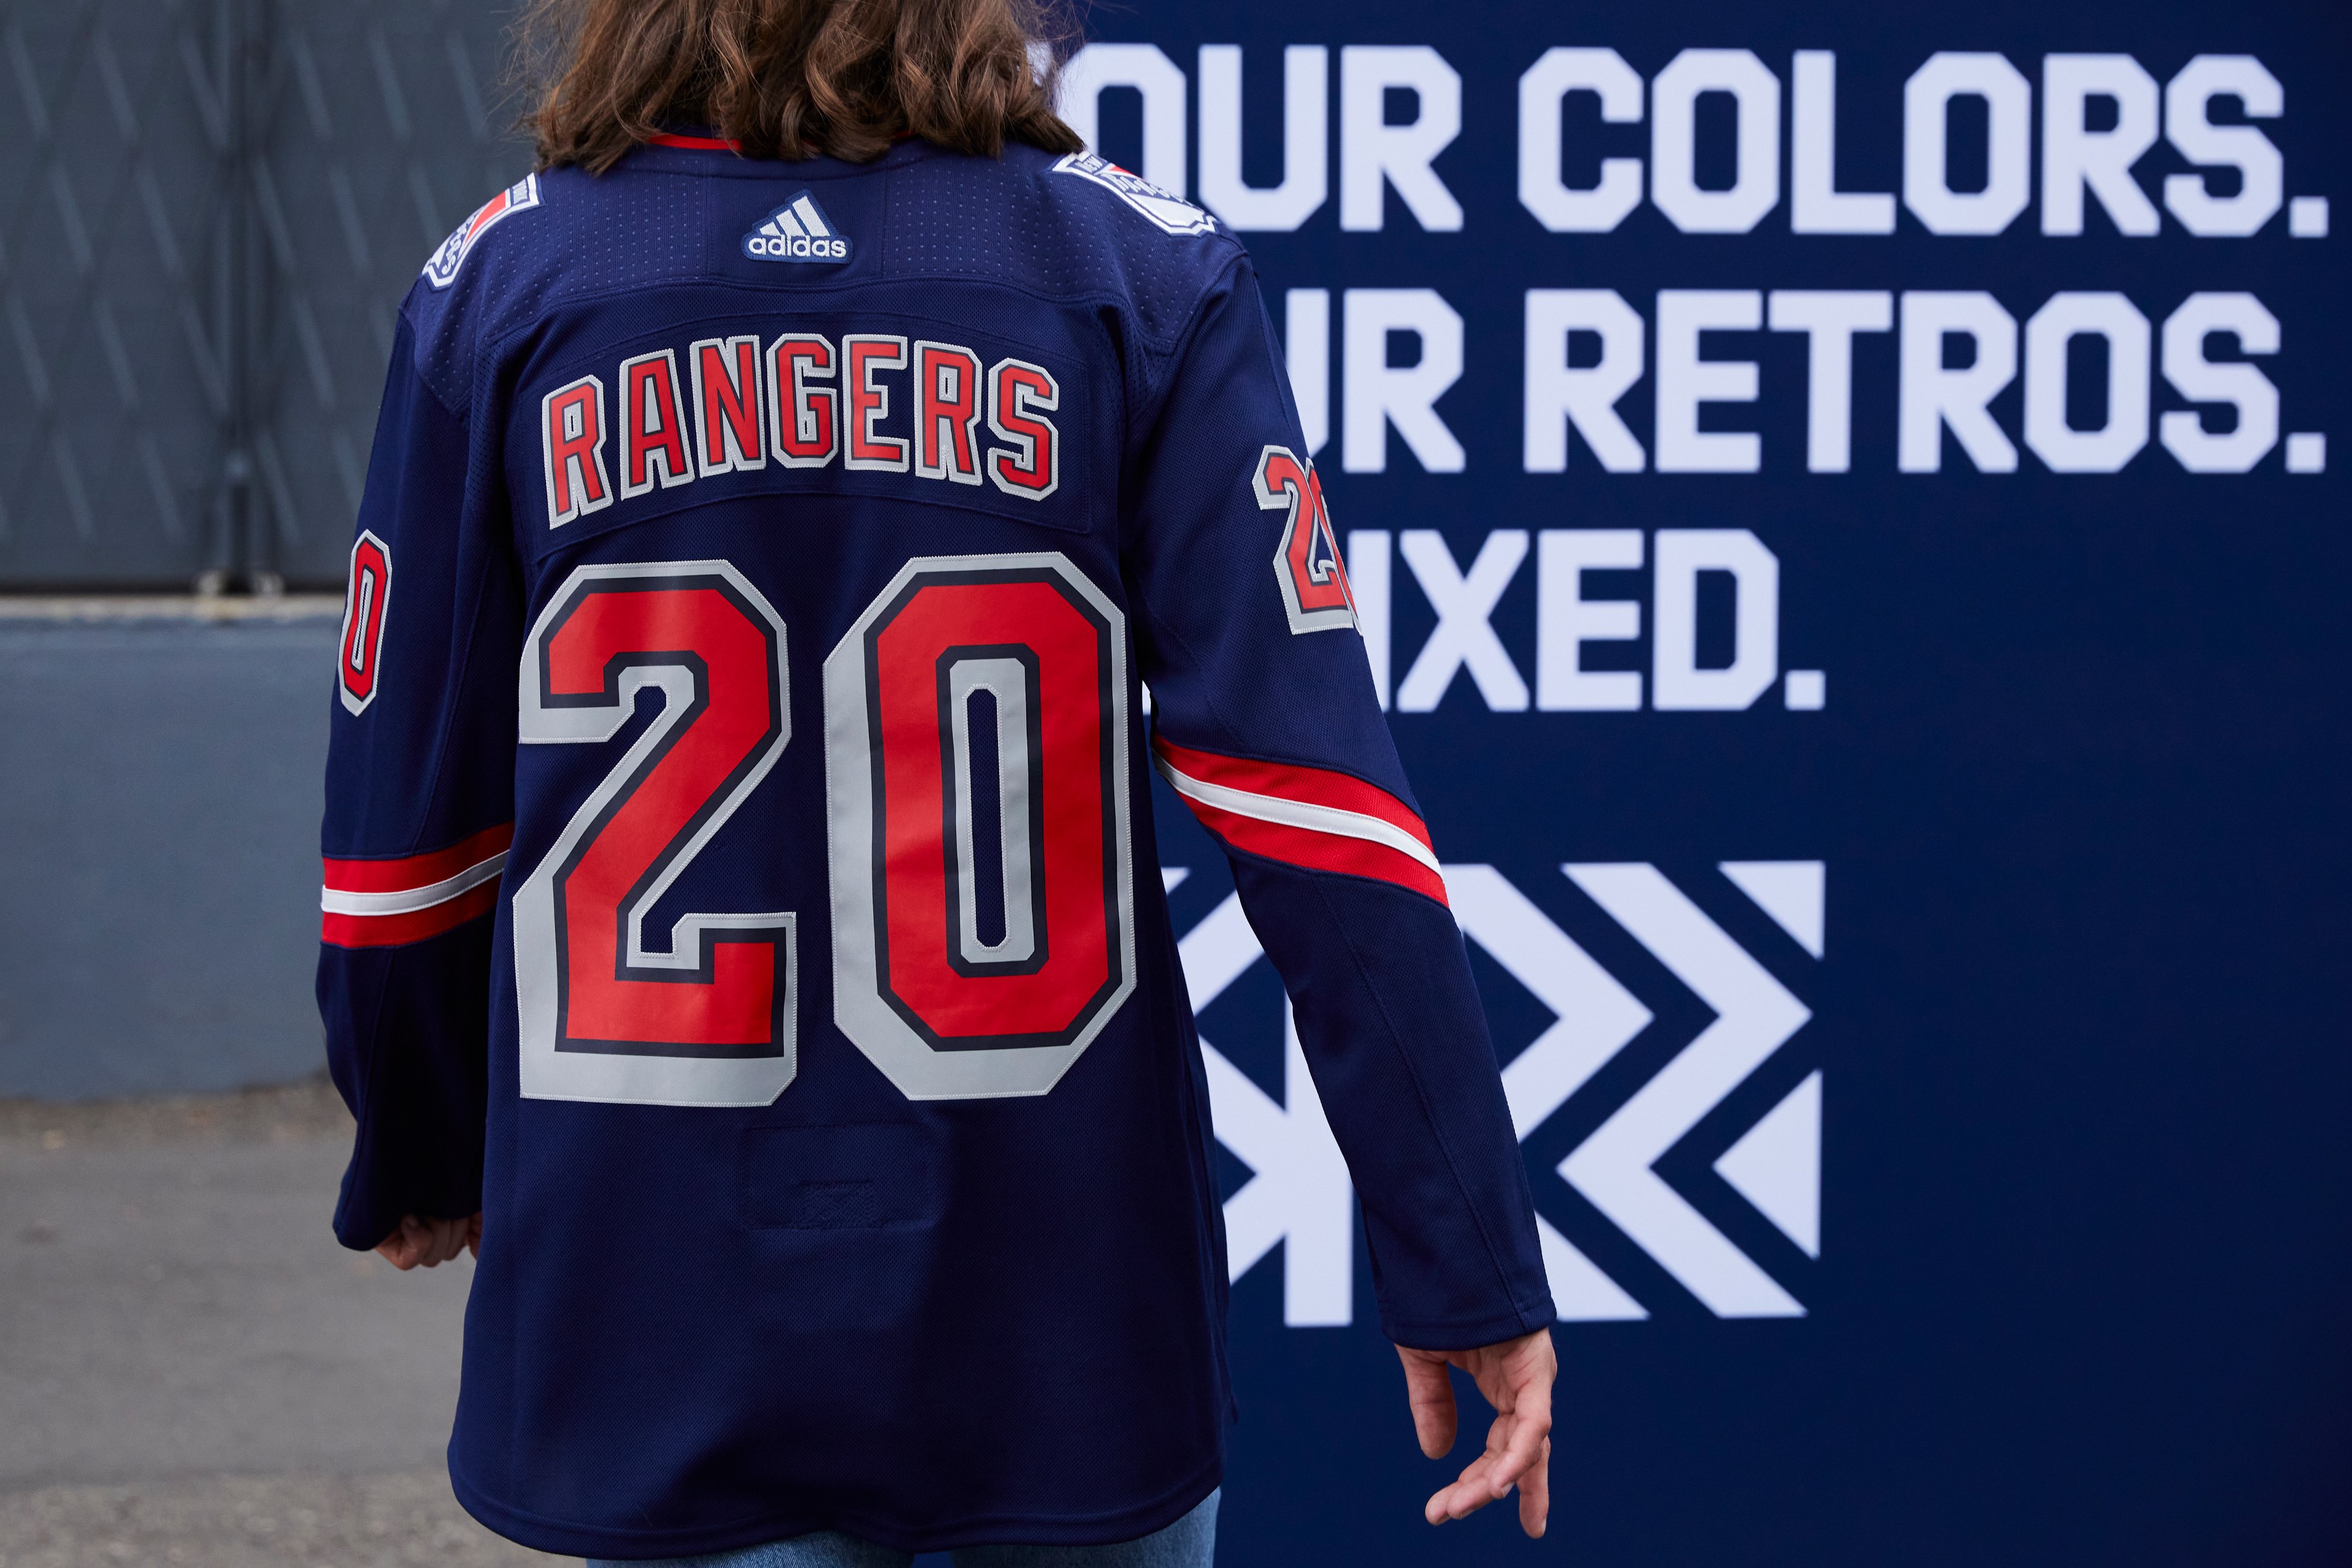 NY Rangers unveil alternate jersey, bring back Statue of Liberty look